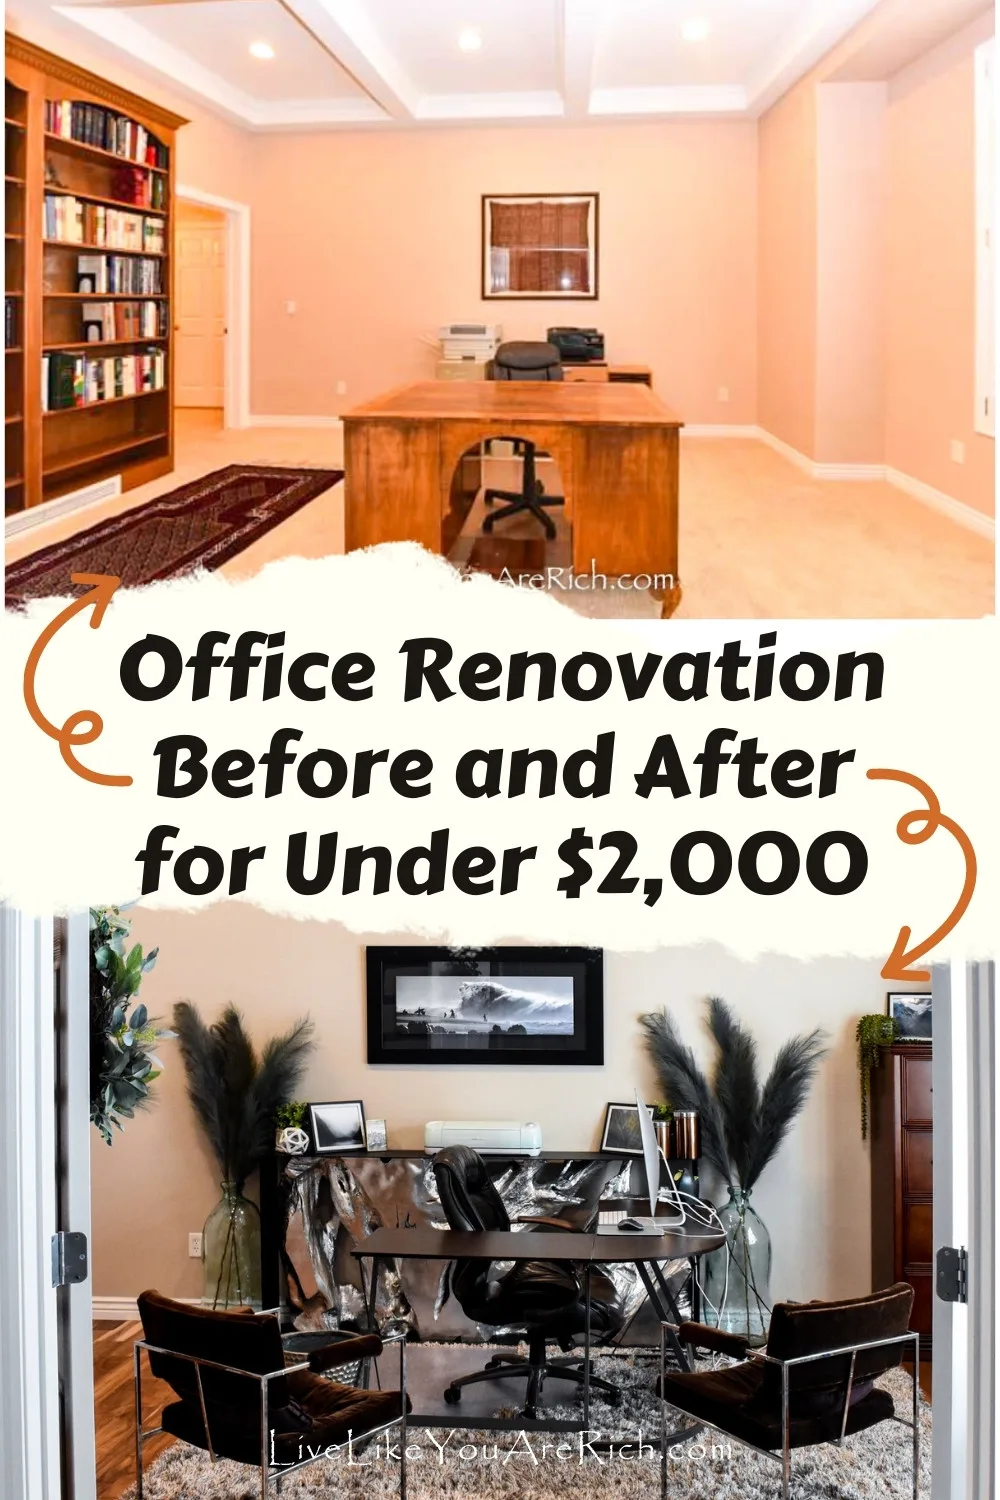 Office Renovation Before and After for Under $2,000